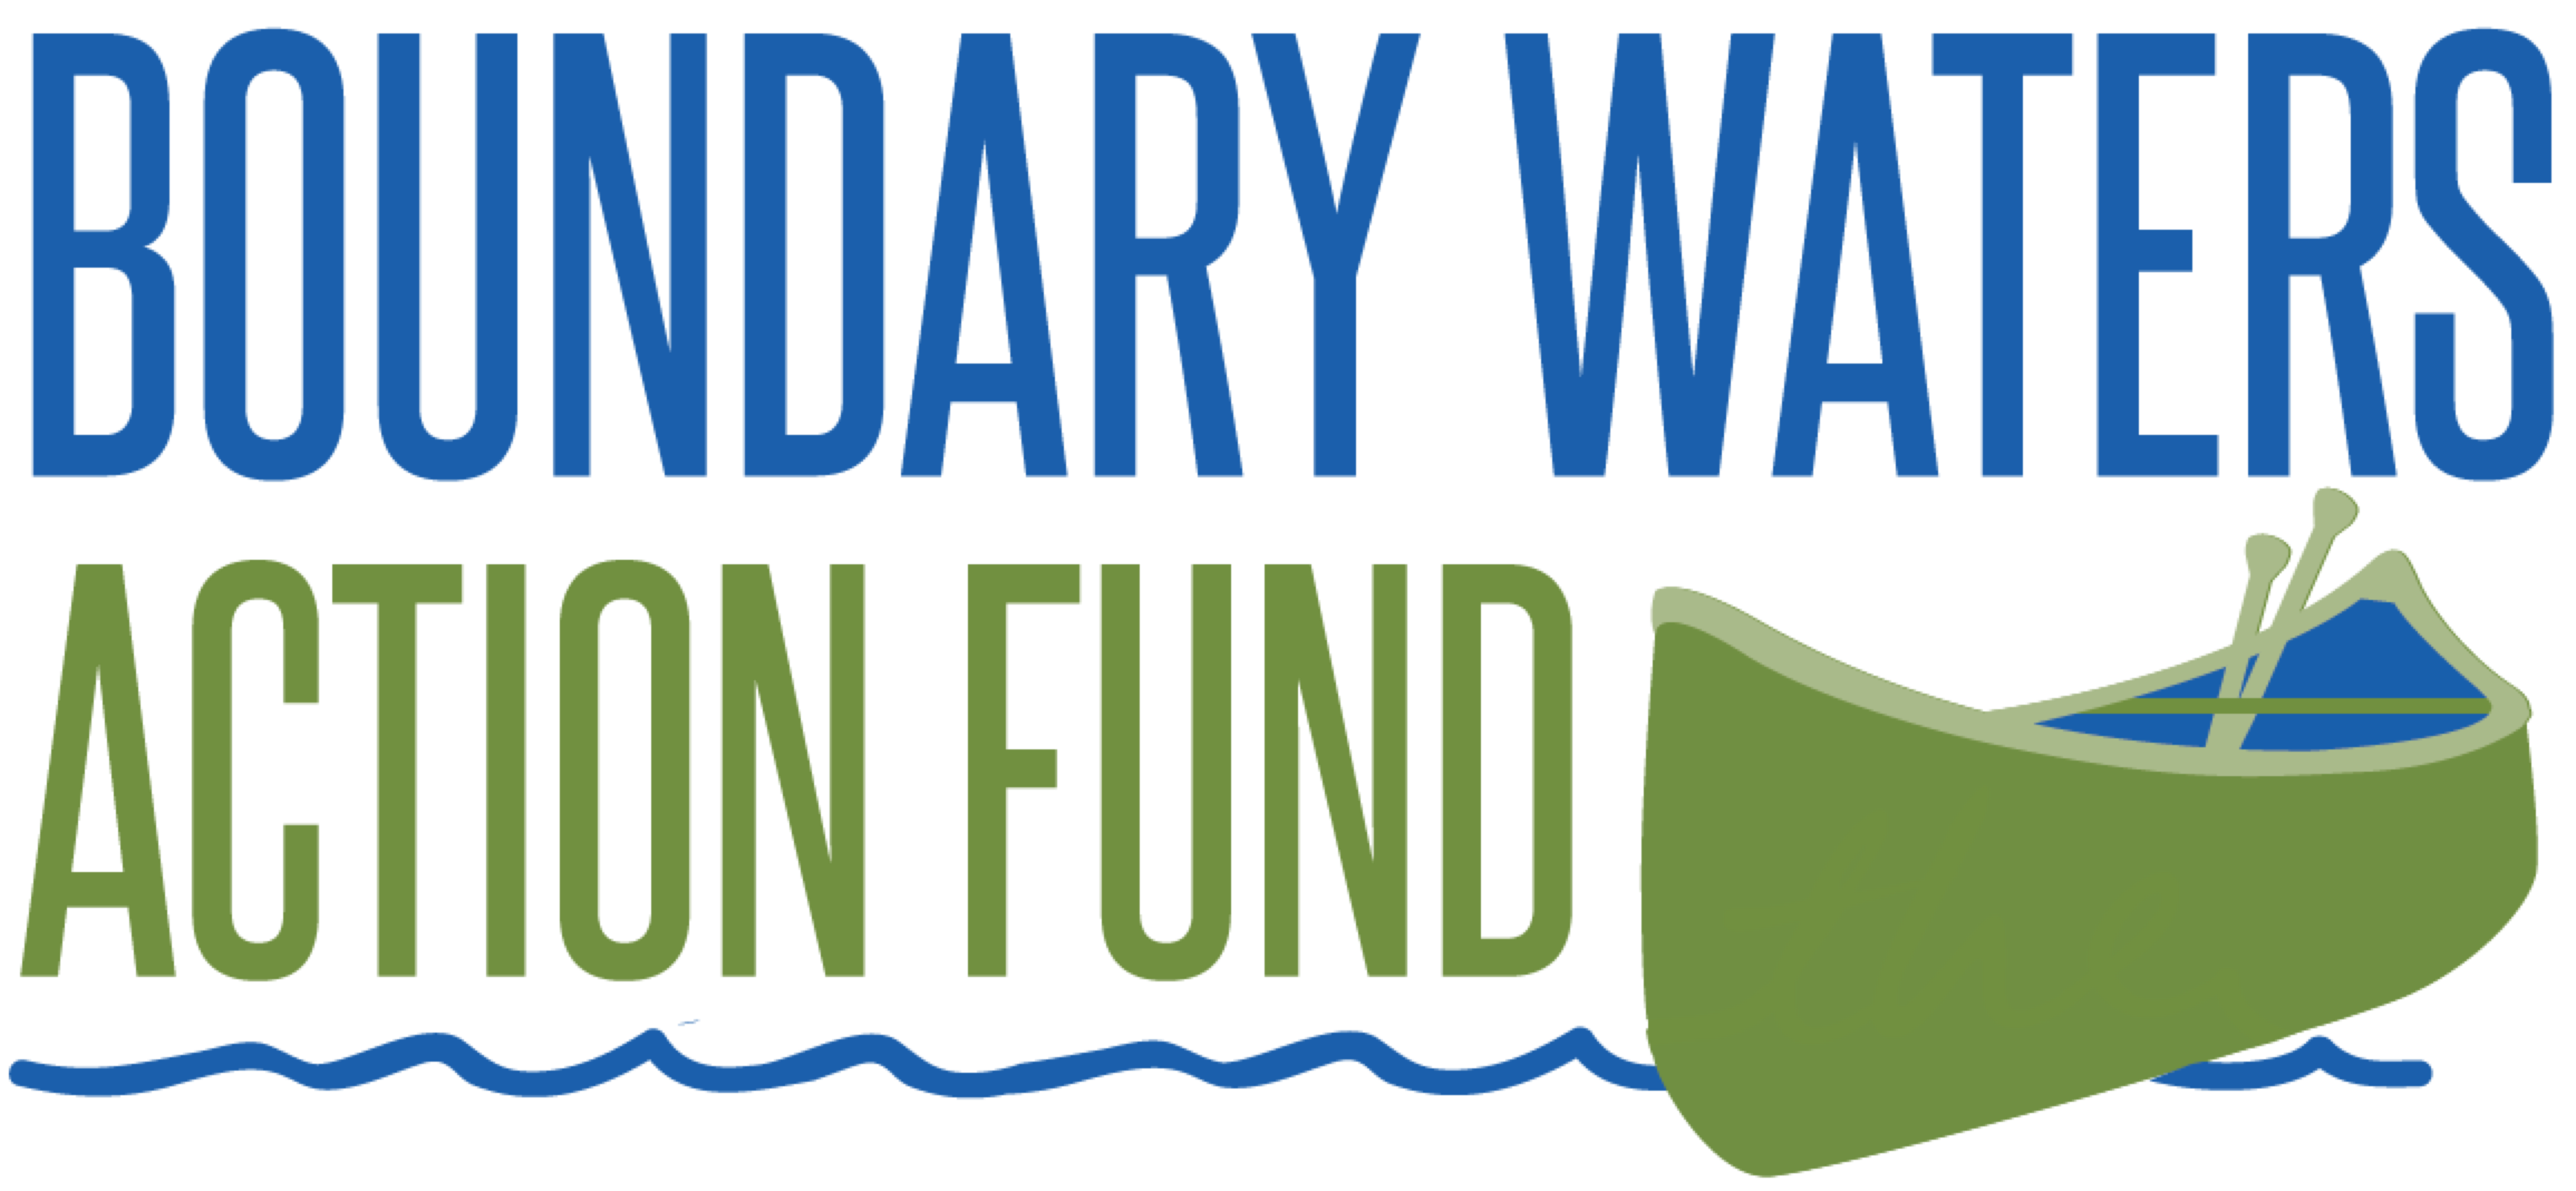 Boundary Waters Action Fund